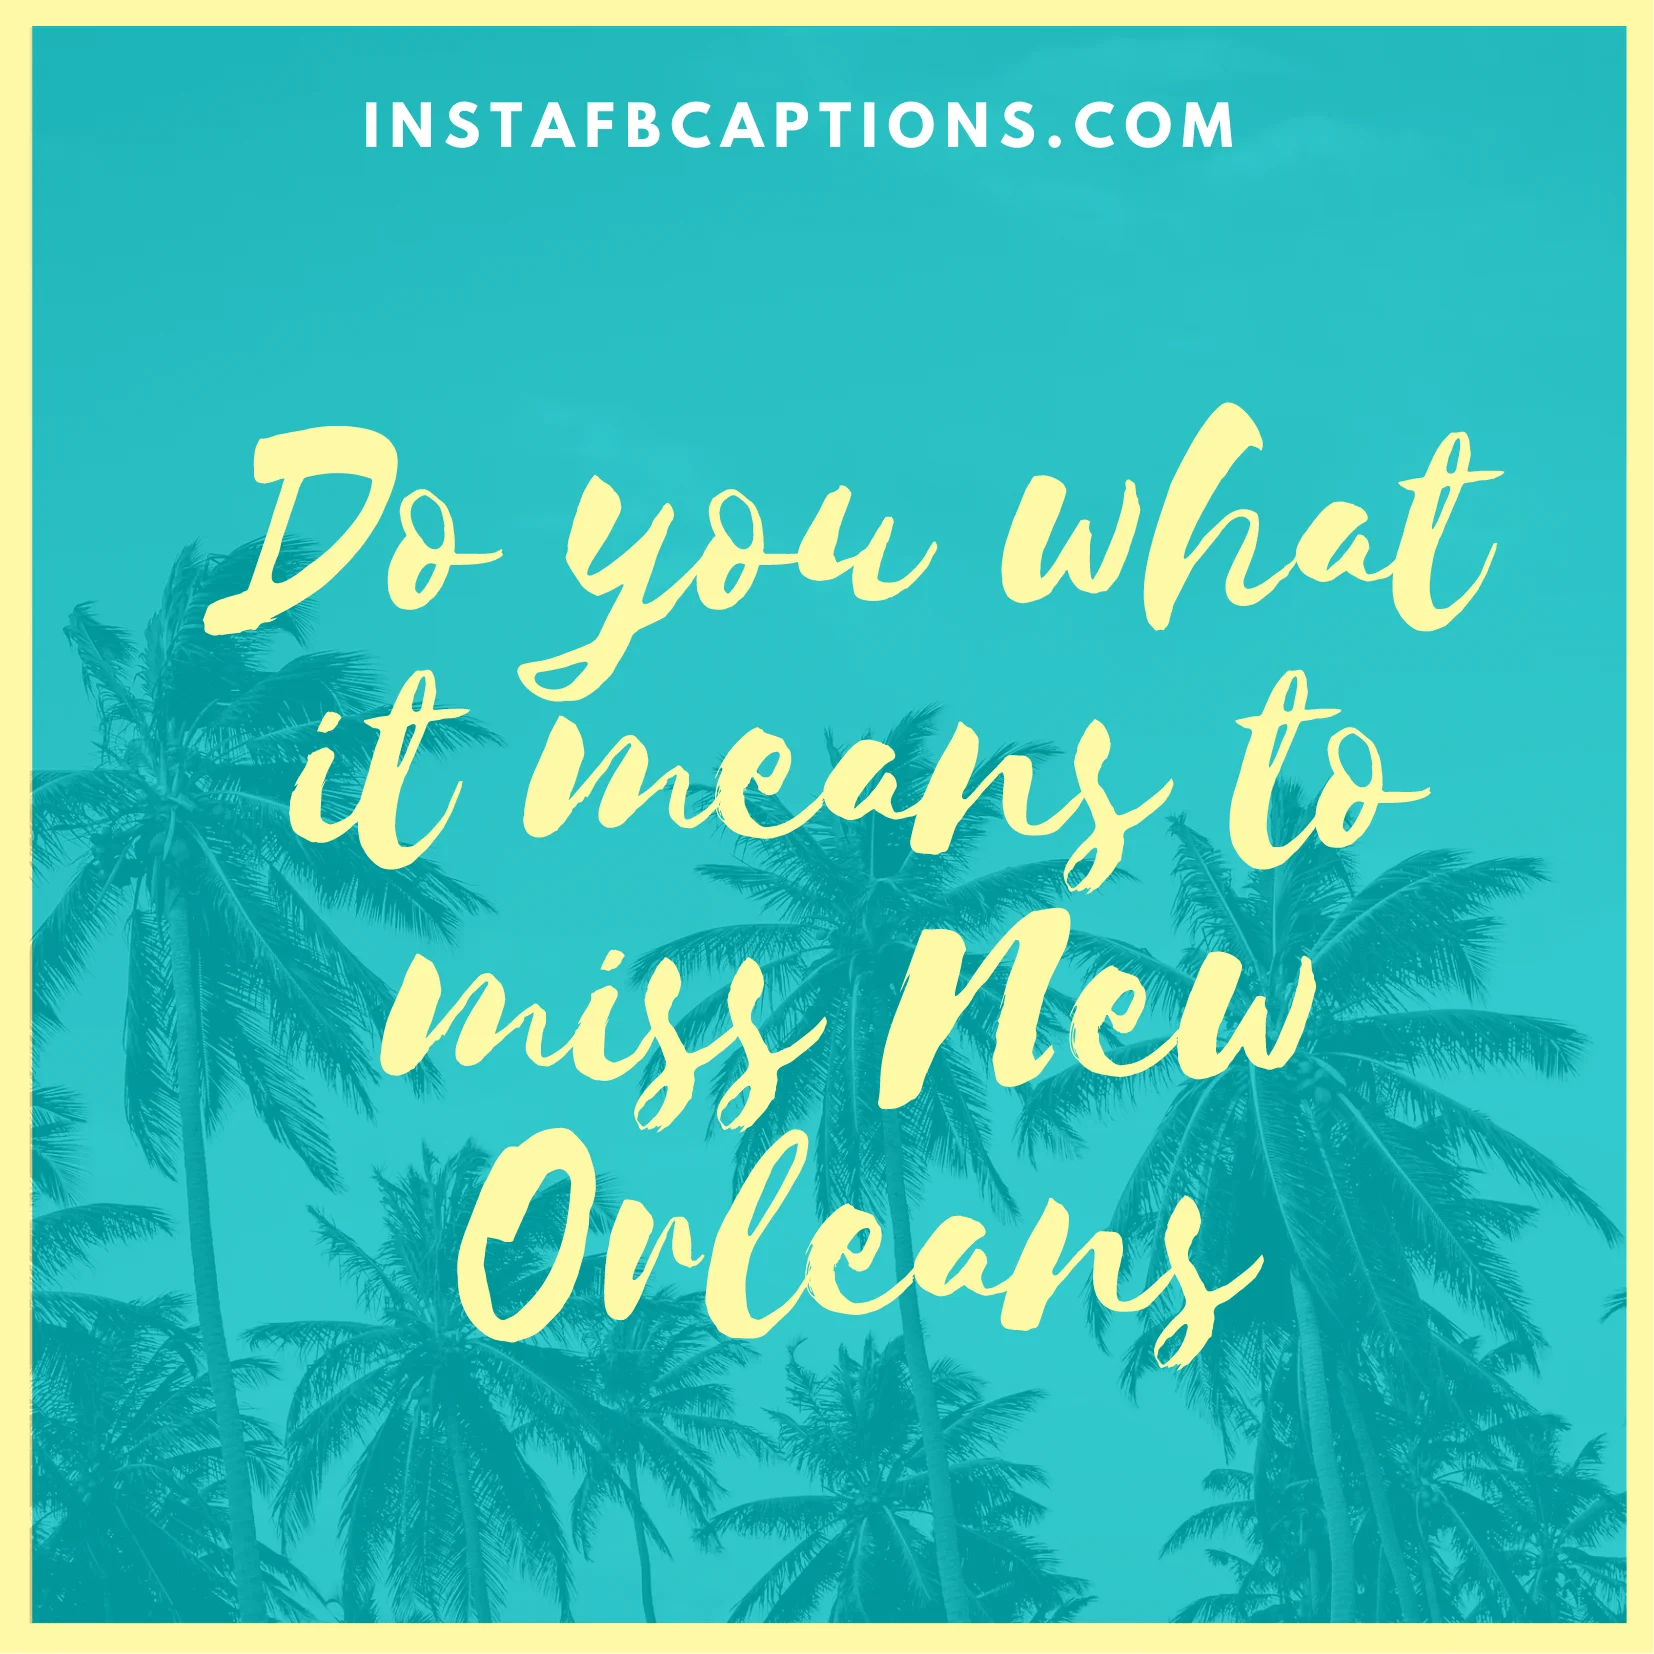 Trendy Instagram Captions New Orleans  - Trendy instagram Captions New Orleans - Funny New Orleans Captions Quotes for Instagram Posts in 2023